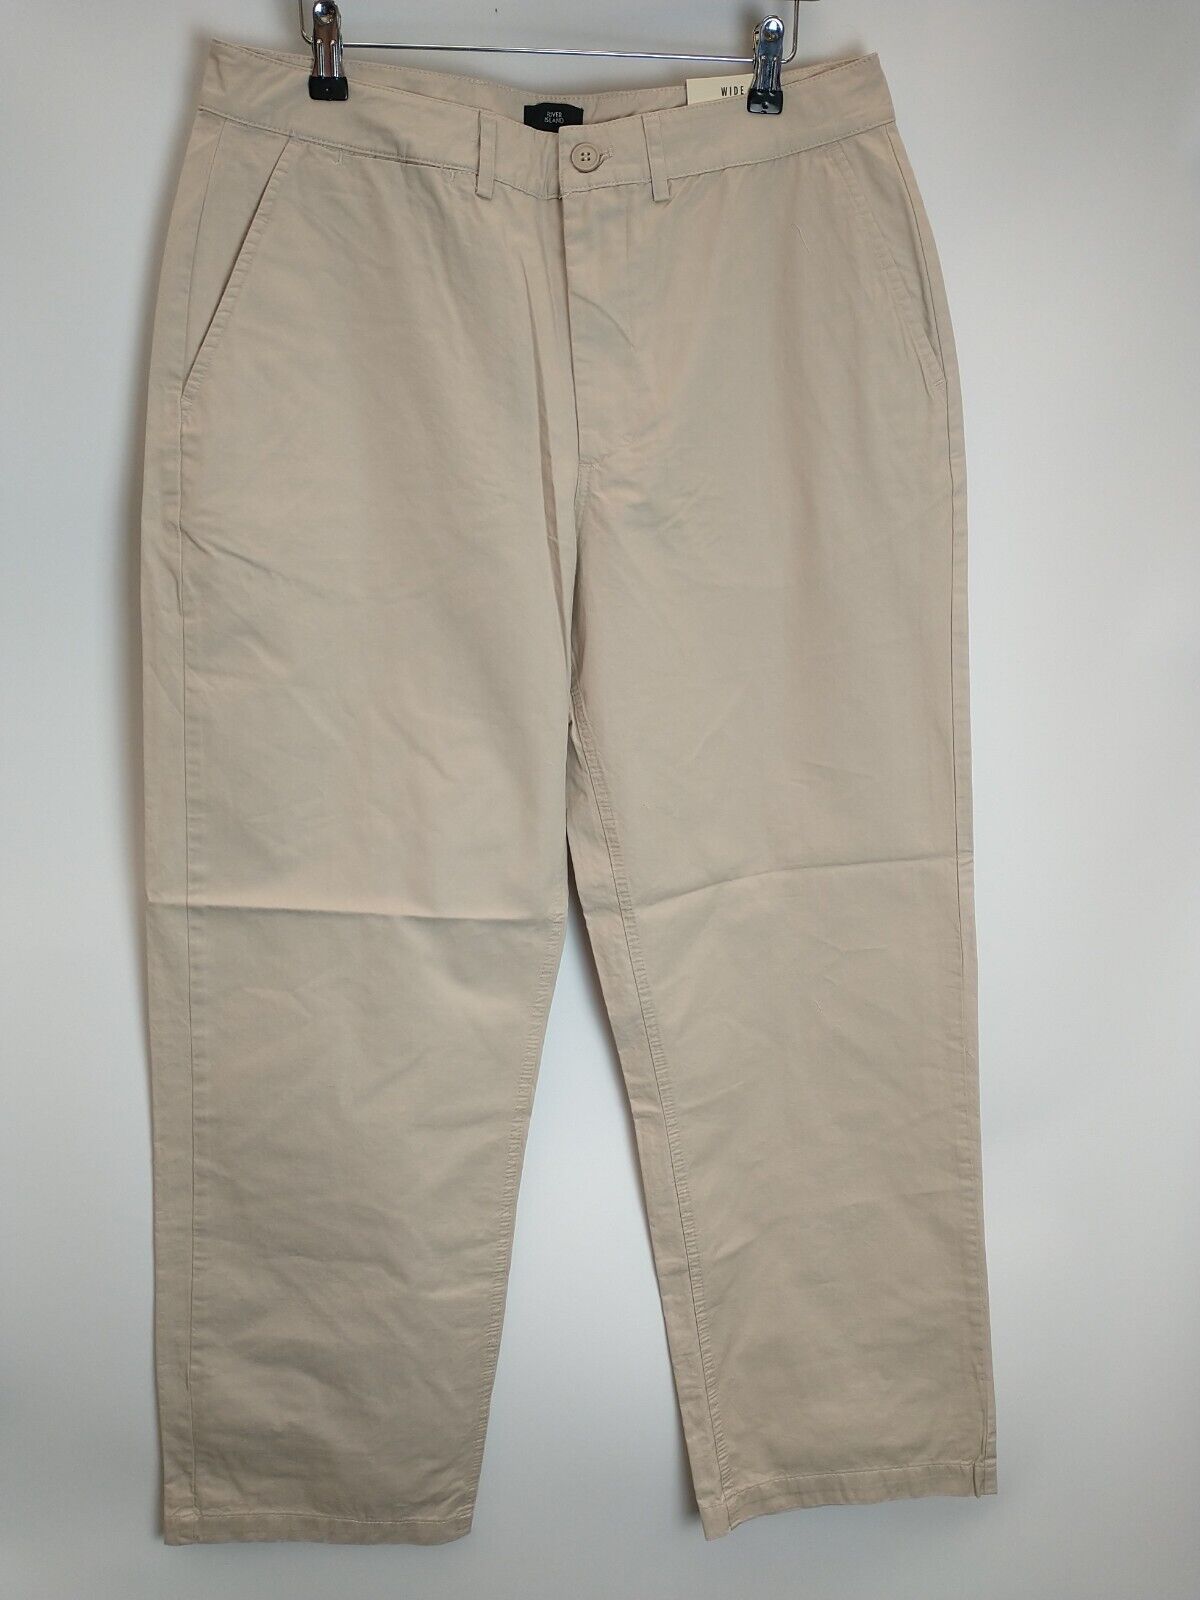 River Island Wide Chino Trousers Men's Size 32R **** V220